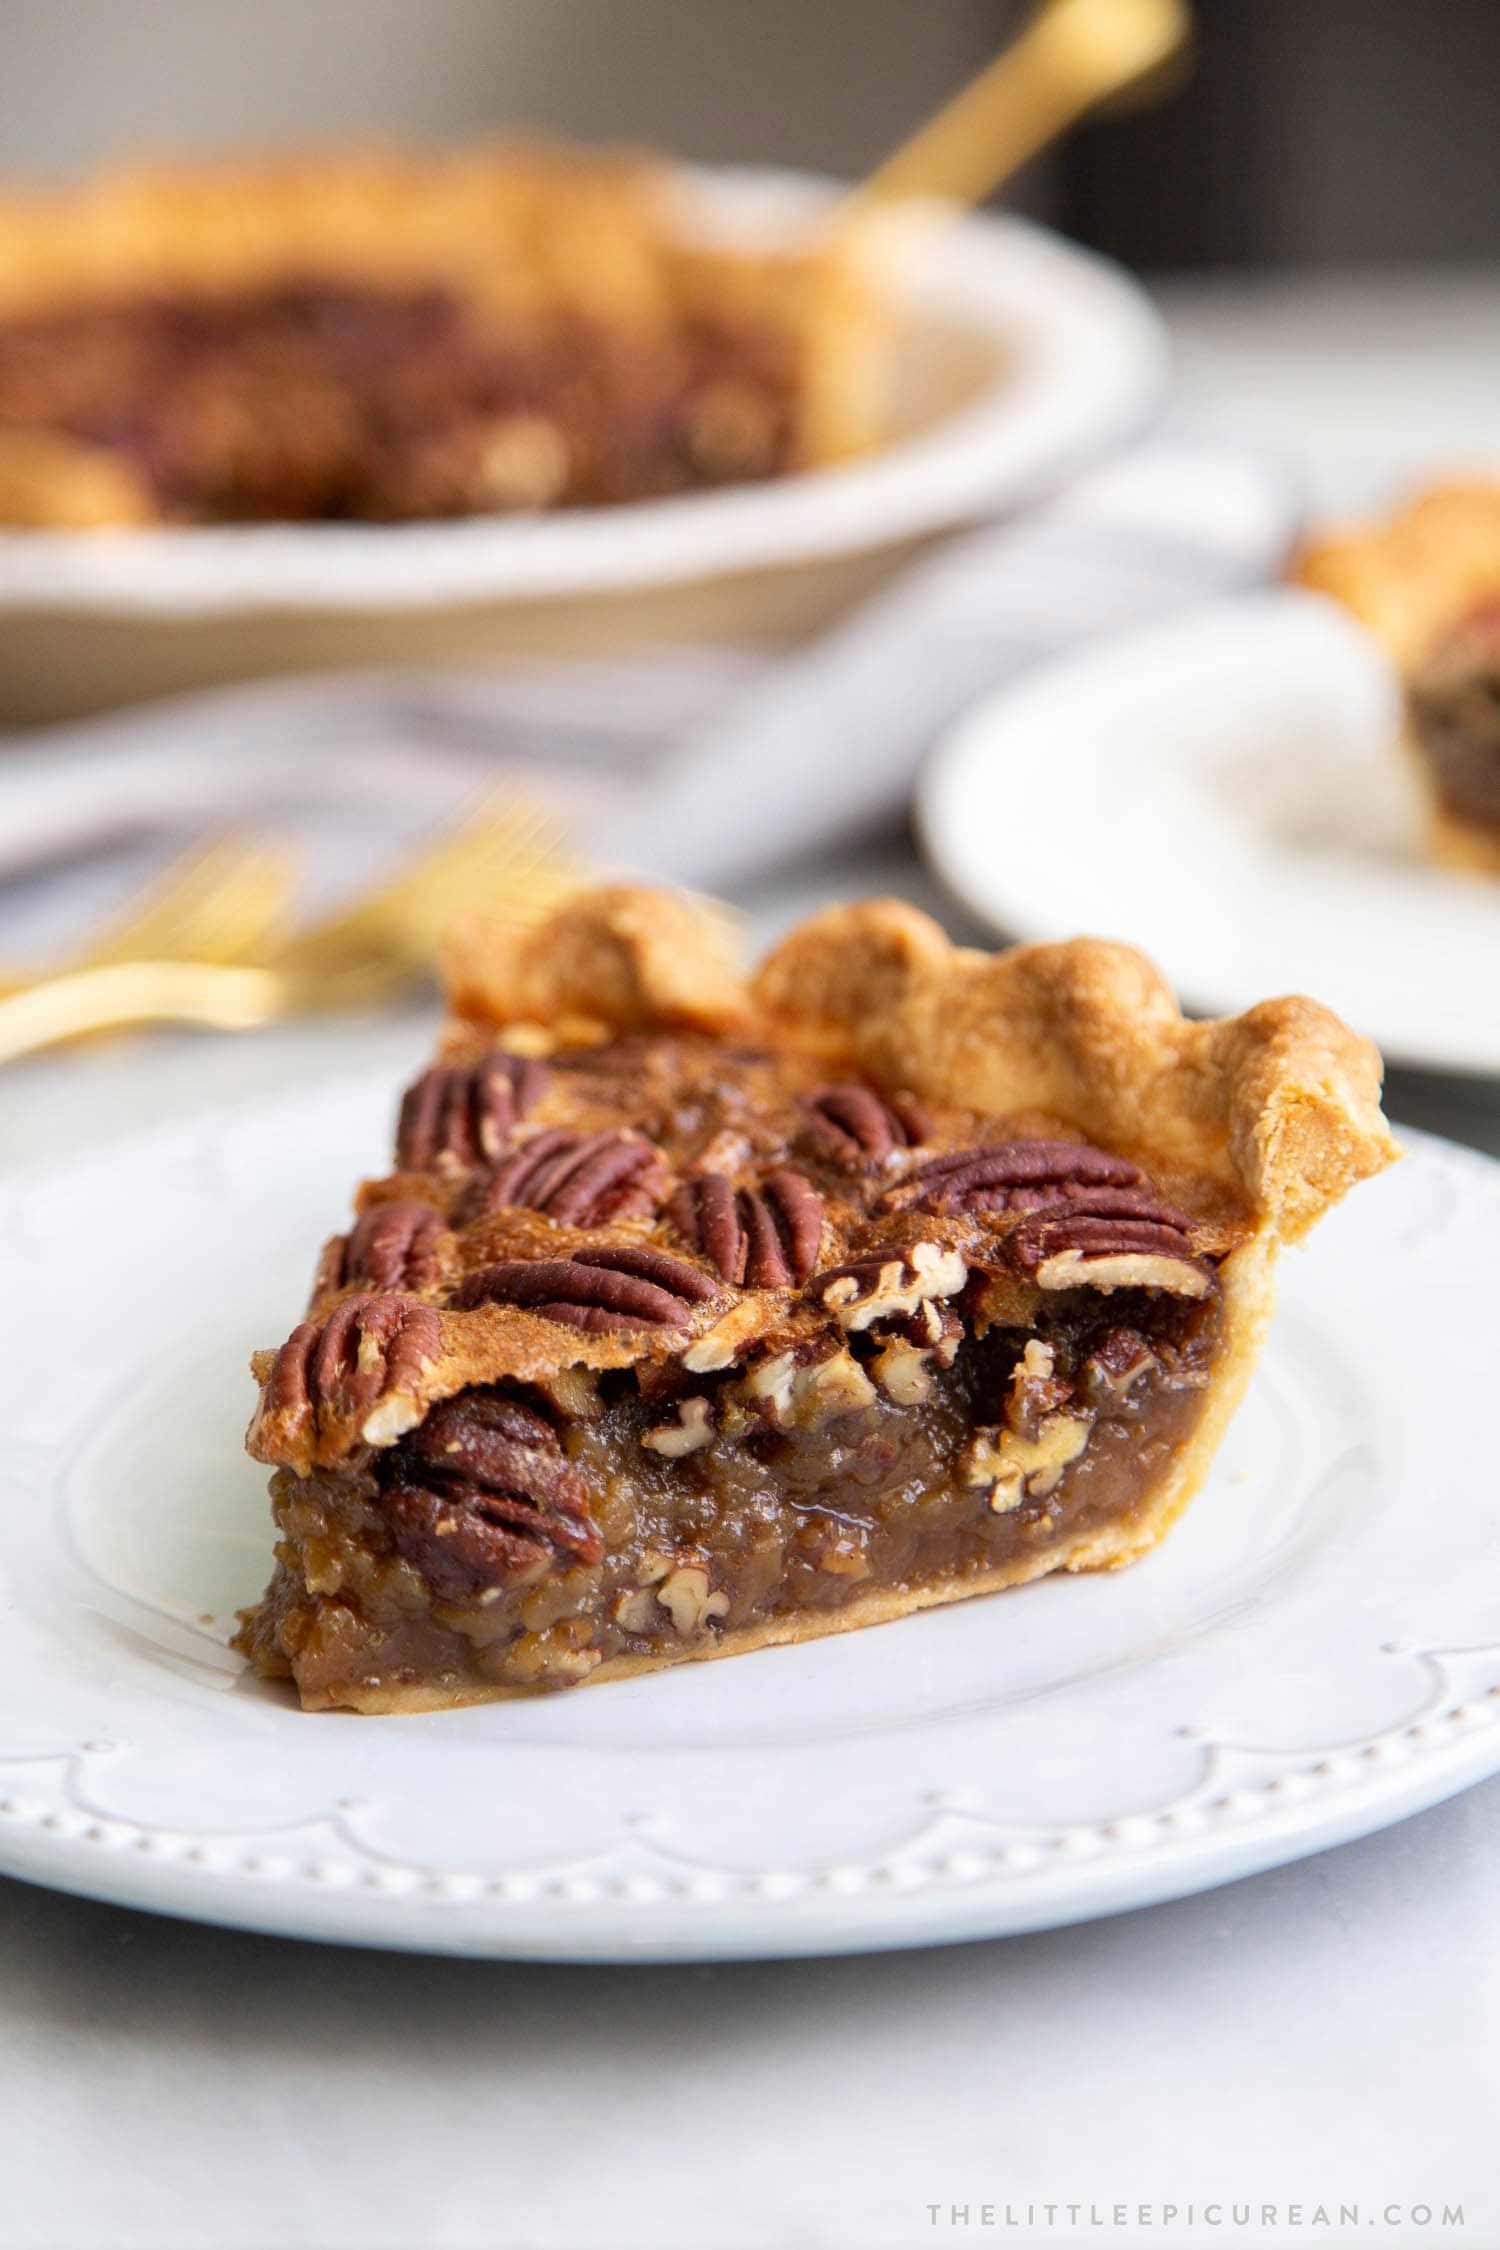 Brown Butter Pecan Pie. Traditional pecan pie with the added warmth and nuttiness of brown butter. This recipe includes a homemade butter pie crust. Perfect for Thanksgiving and beyond! #pecanpie #pie #classicpie #recipe #thanksgiving #holidays #fallbaking